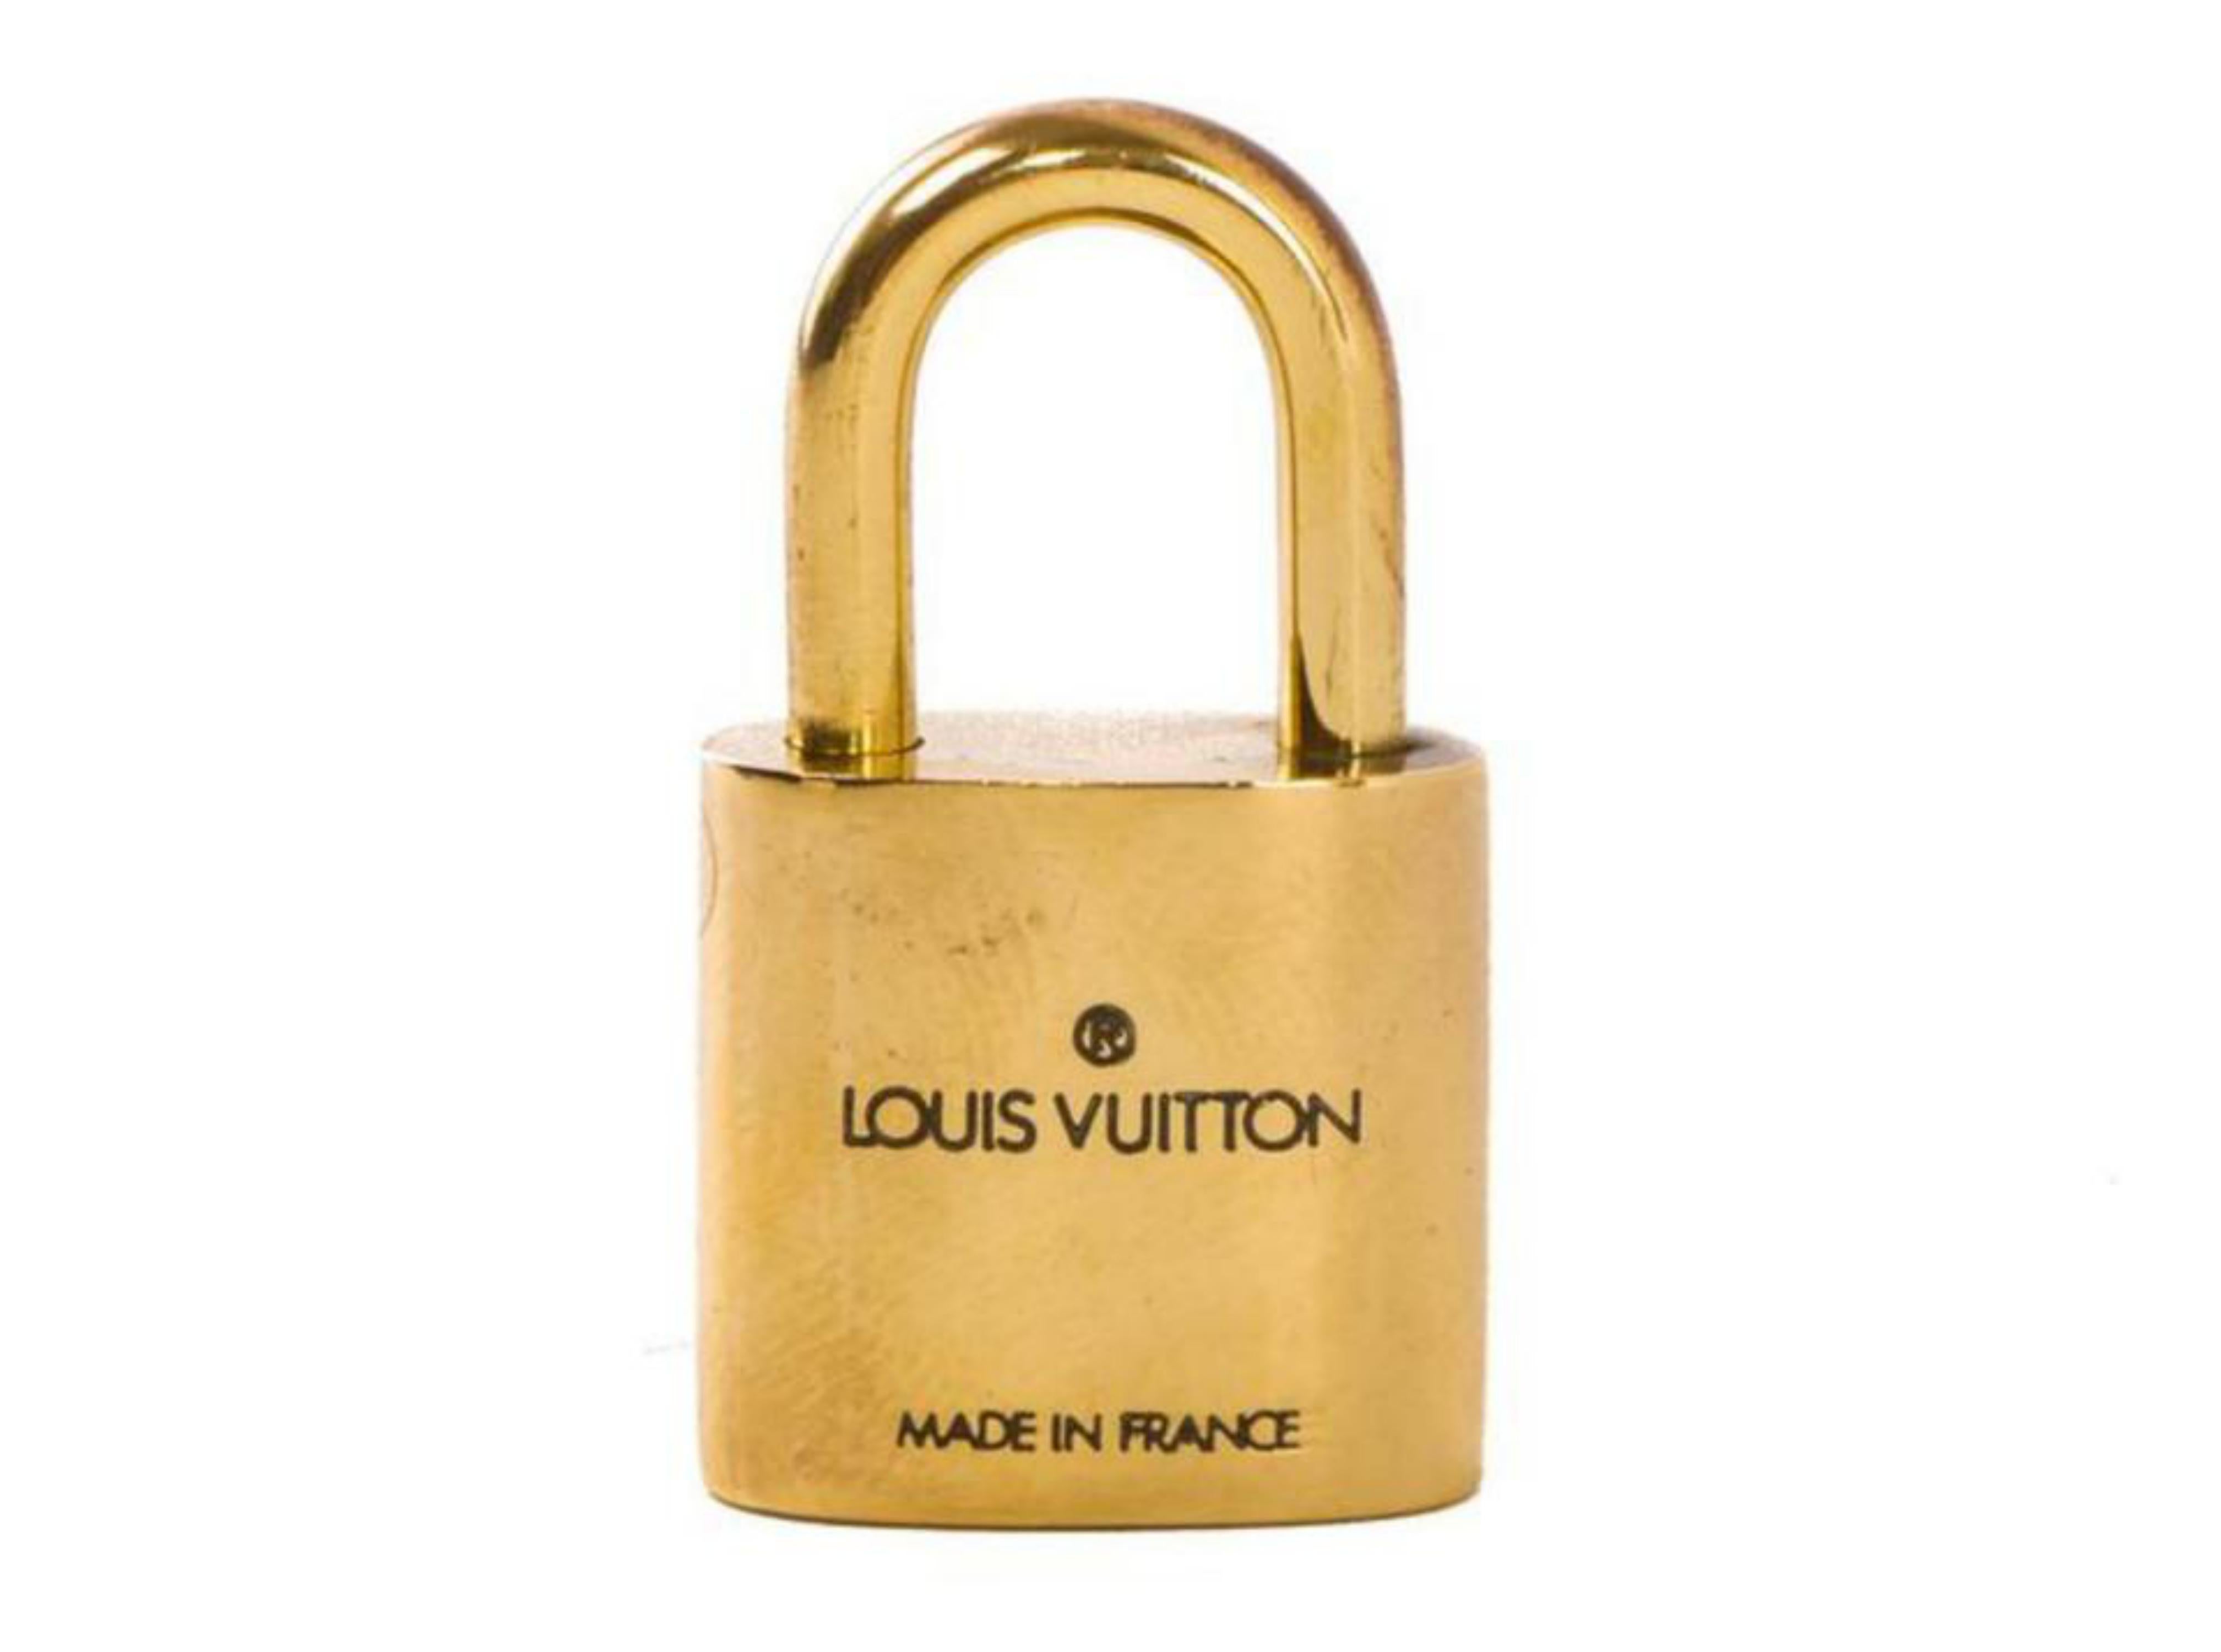 Louis Vuitton Gold Single Key Lock Pad Lock and Key 867695 For Sale 3